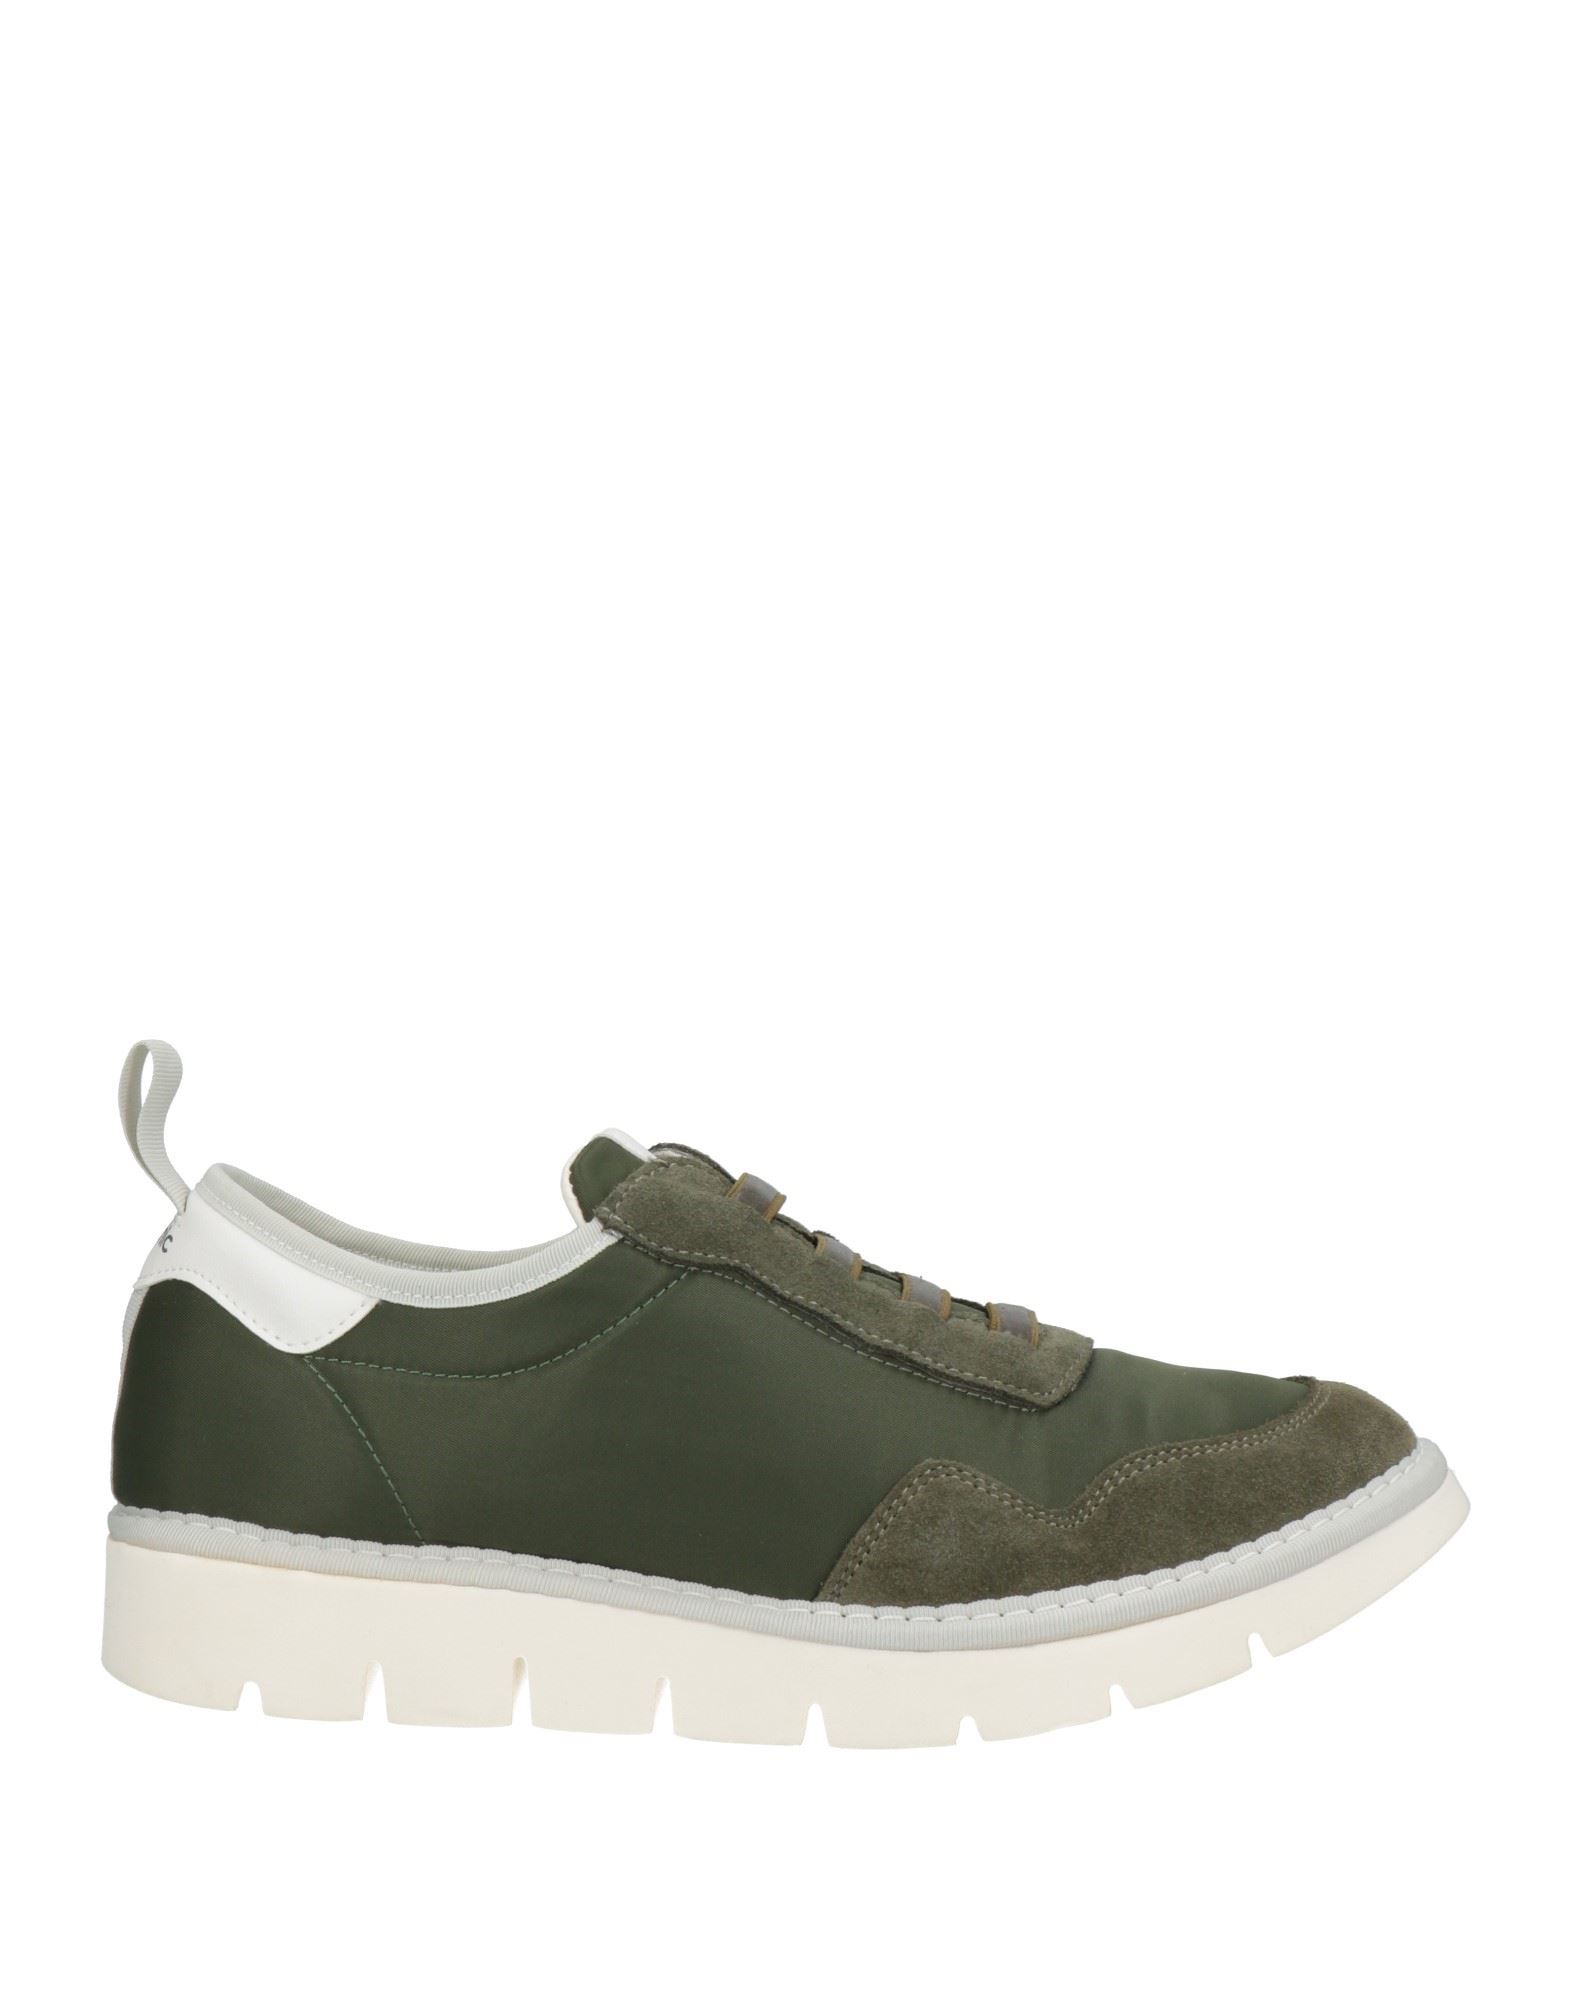 Pànchic Sneakers In Military Green